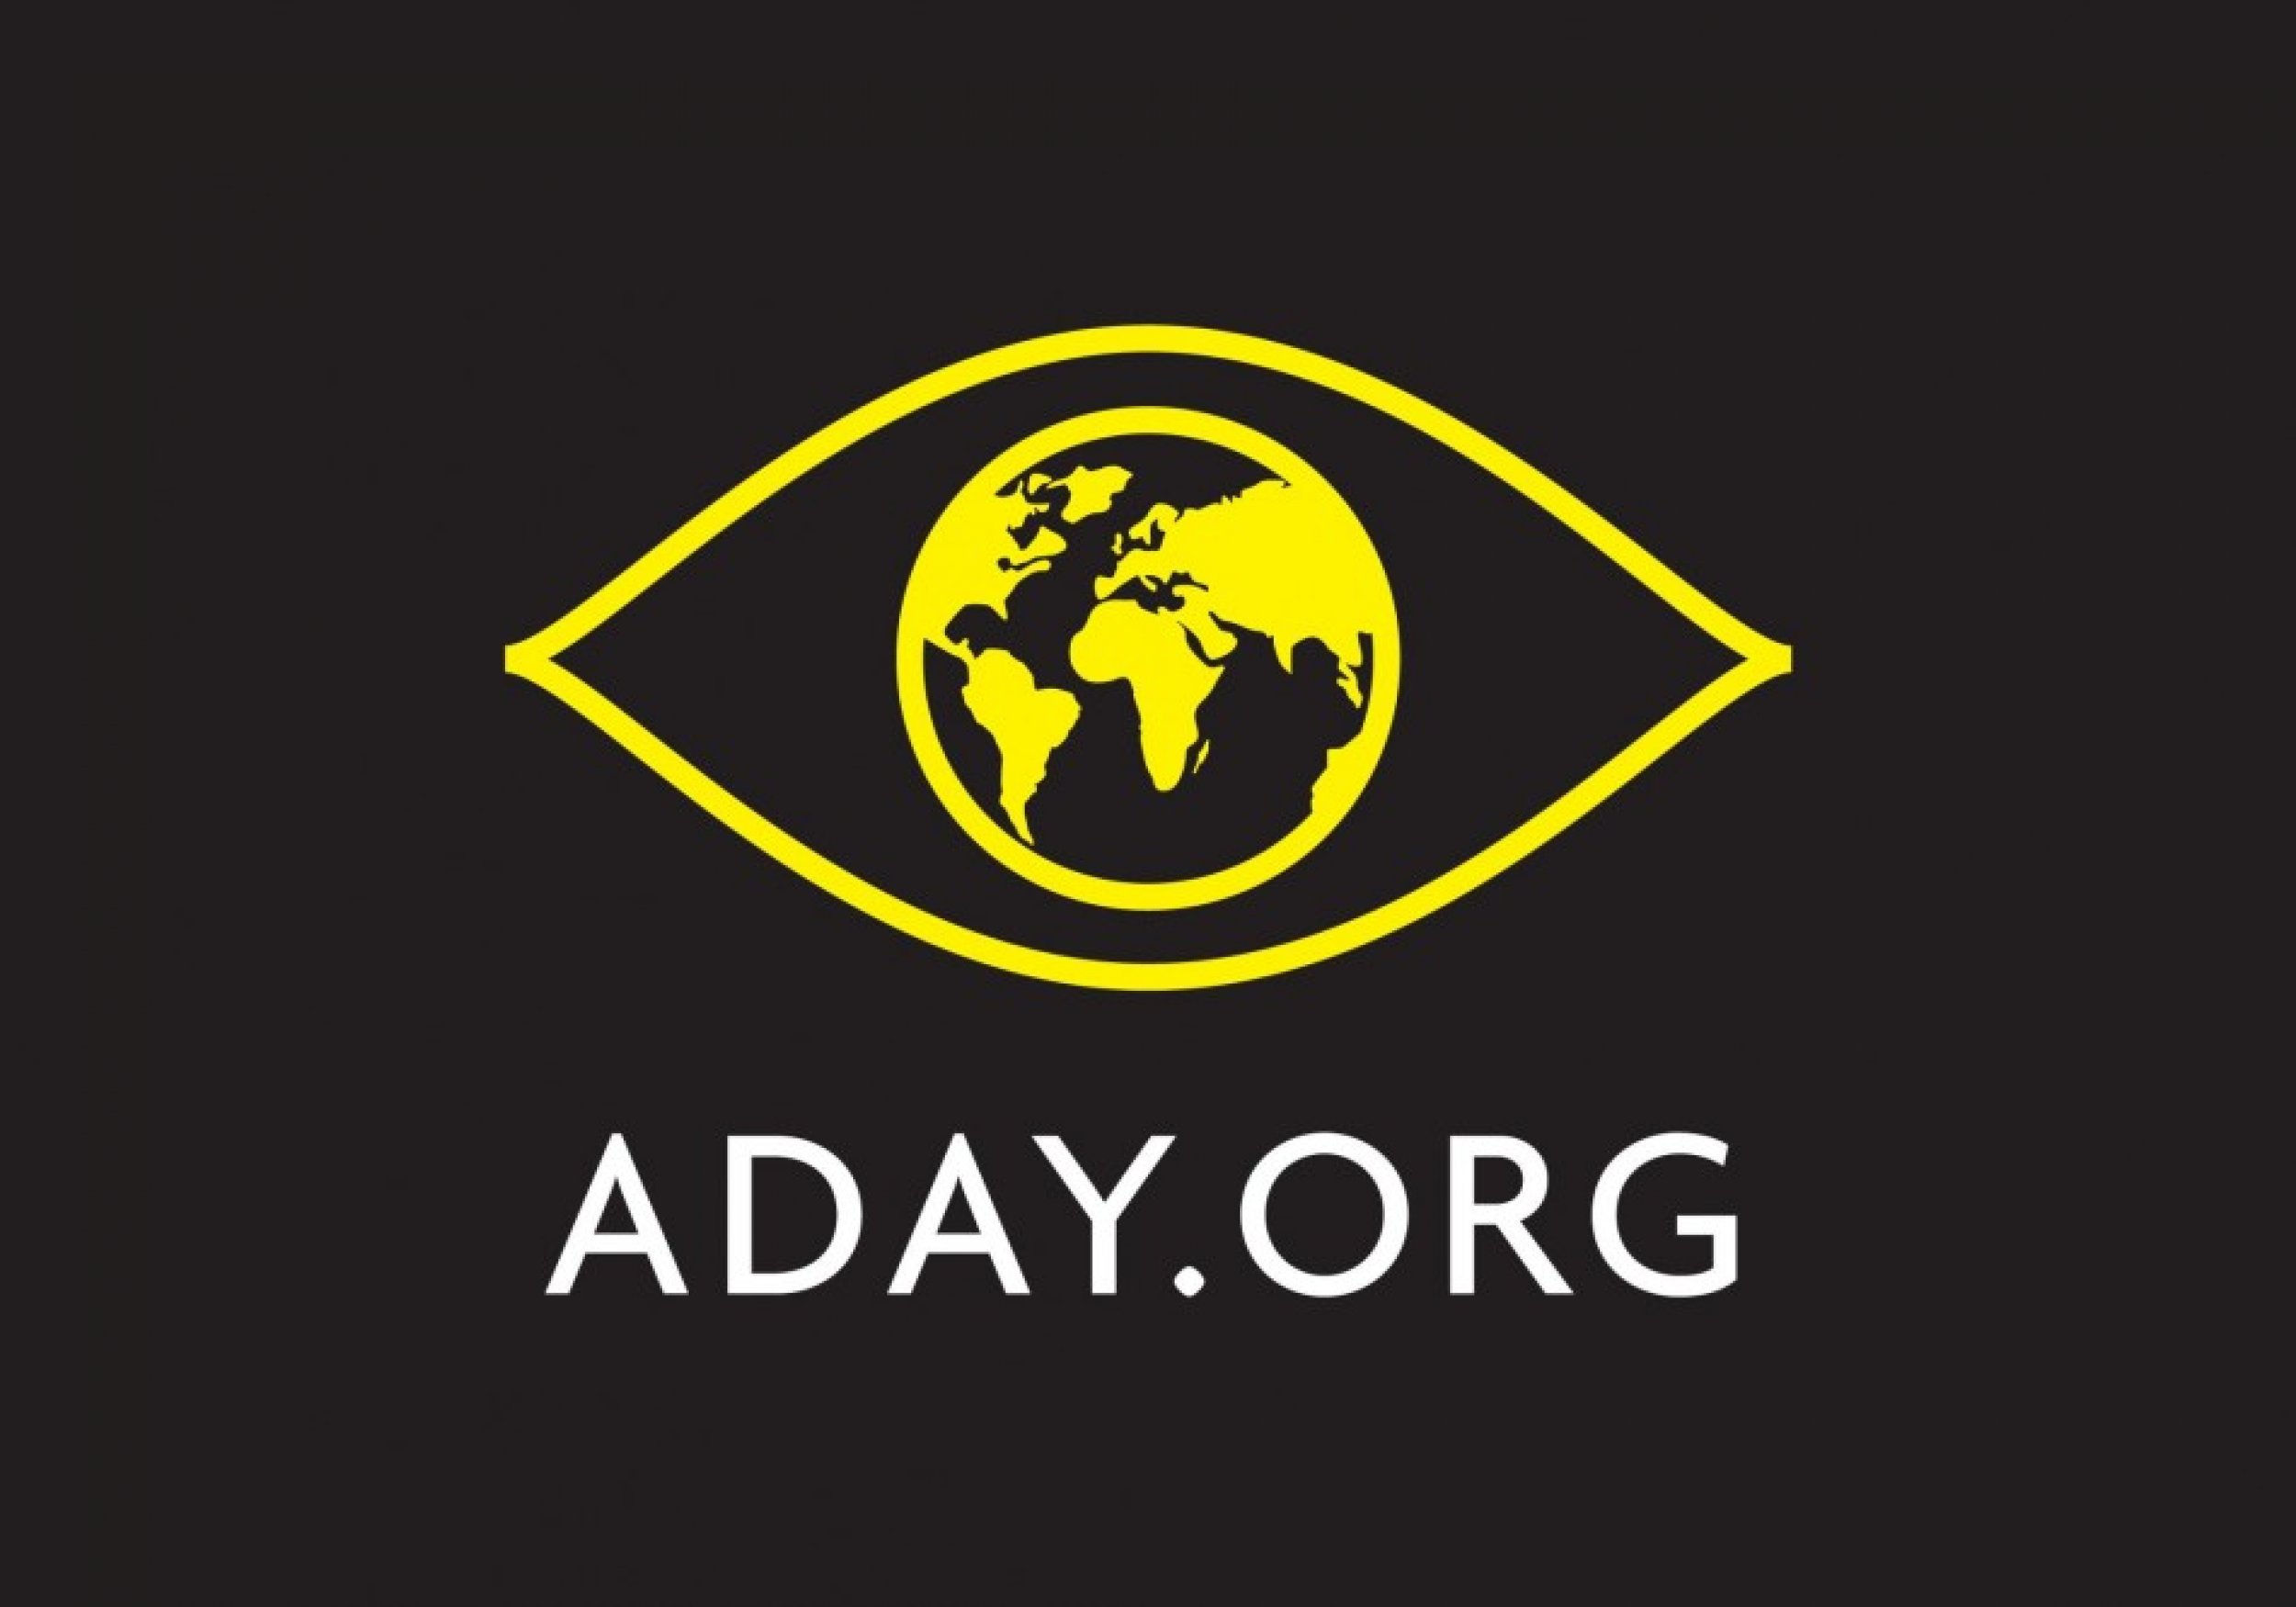 aday.org